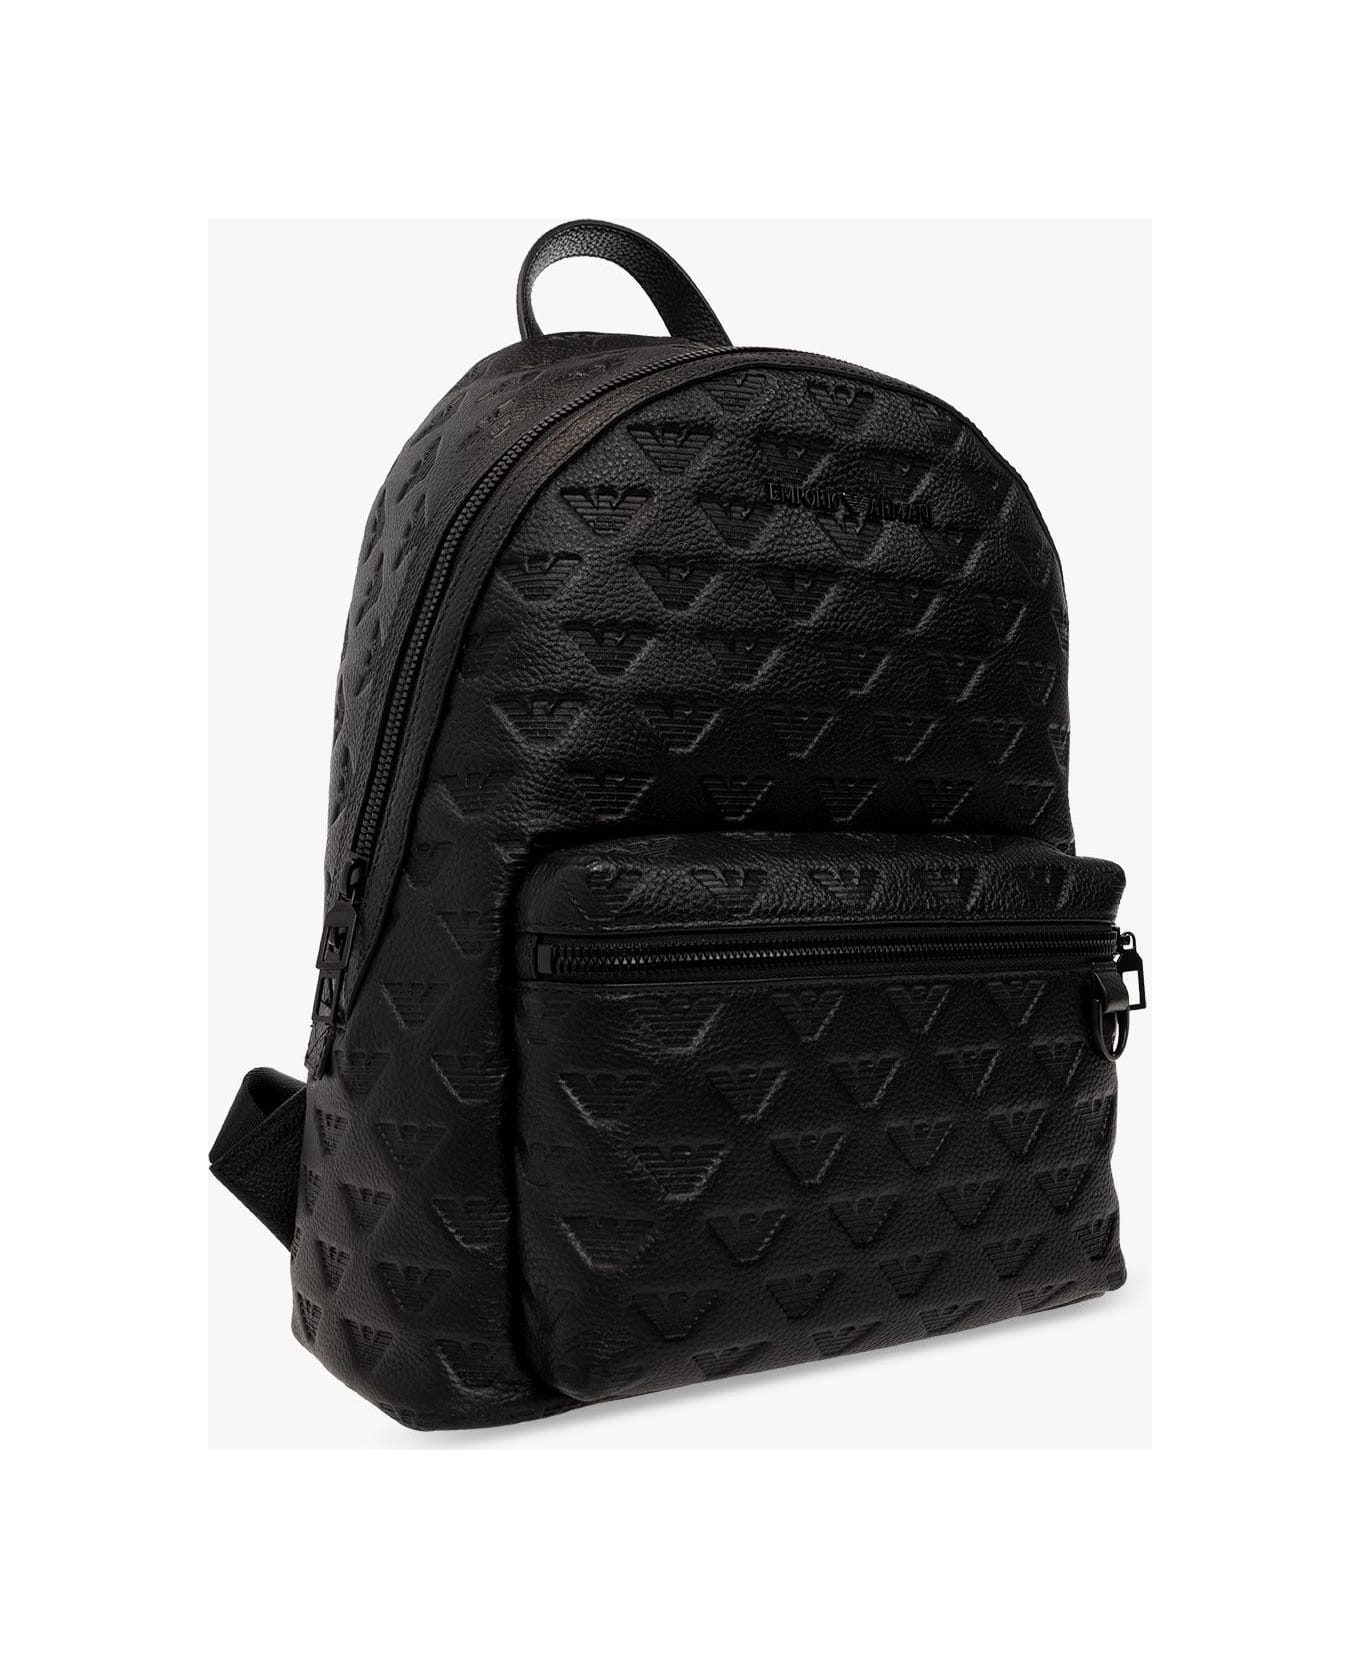 Emporio Armani Embossed Leather Backpack - Black